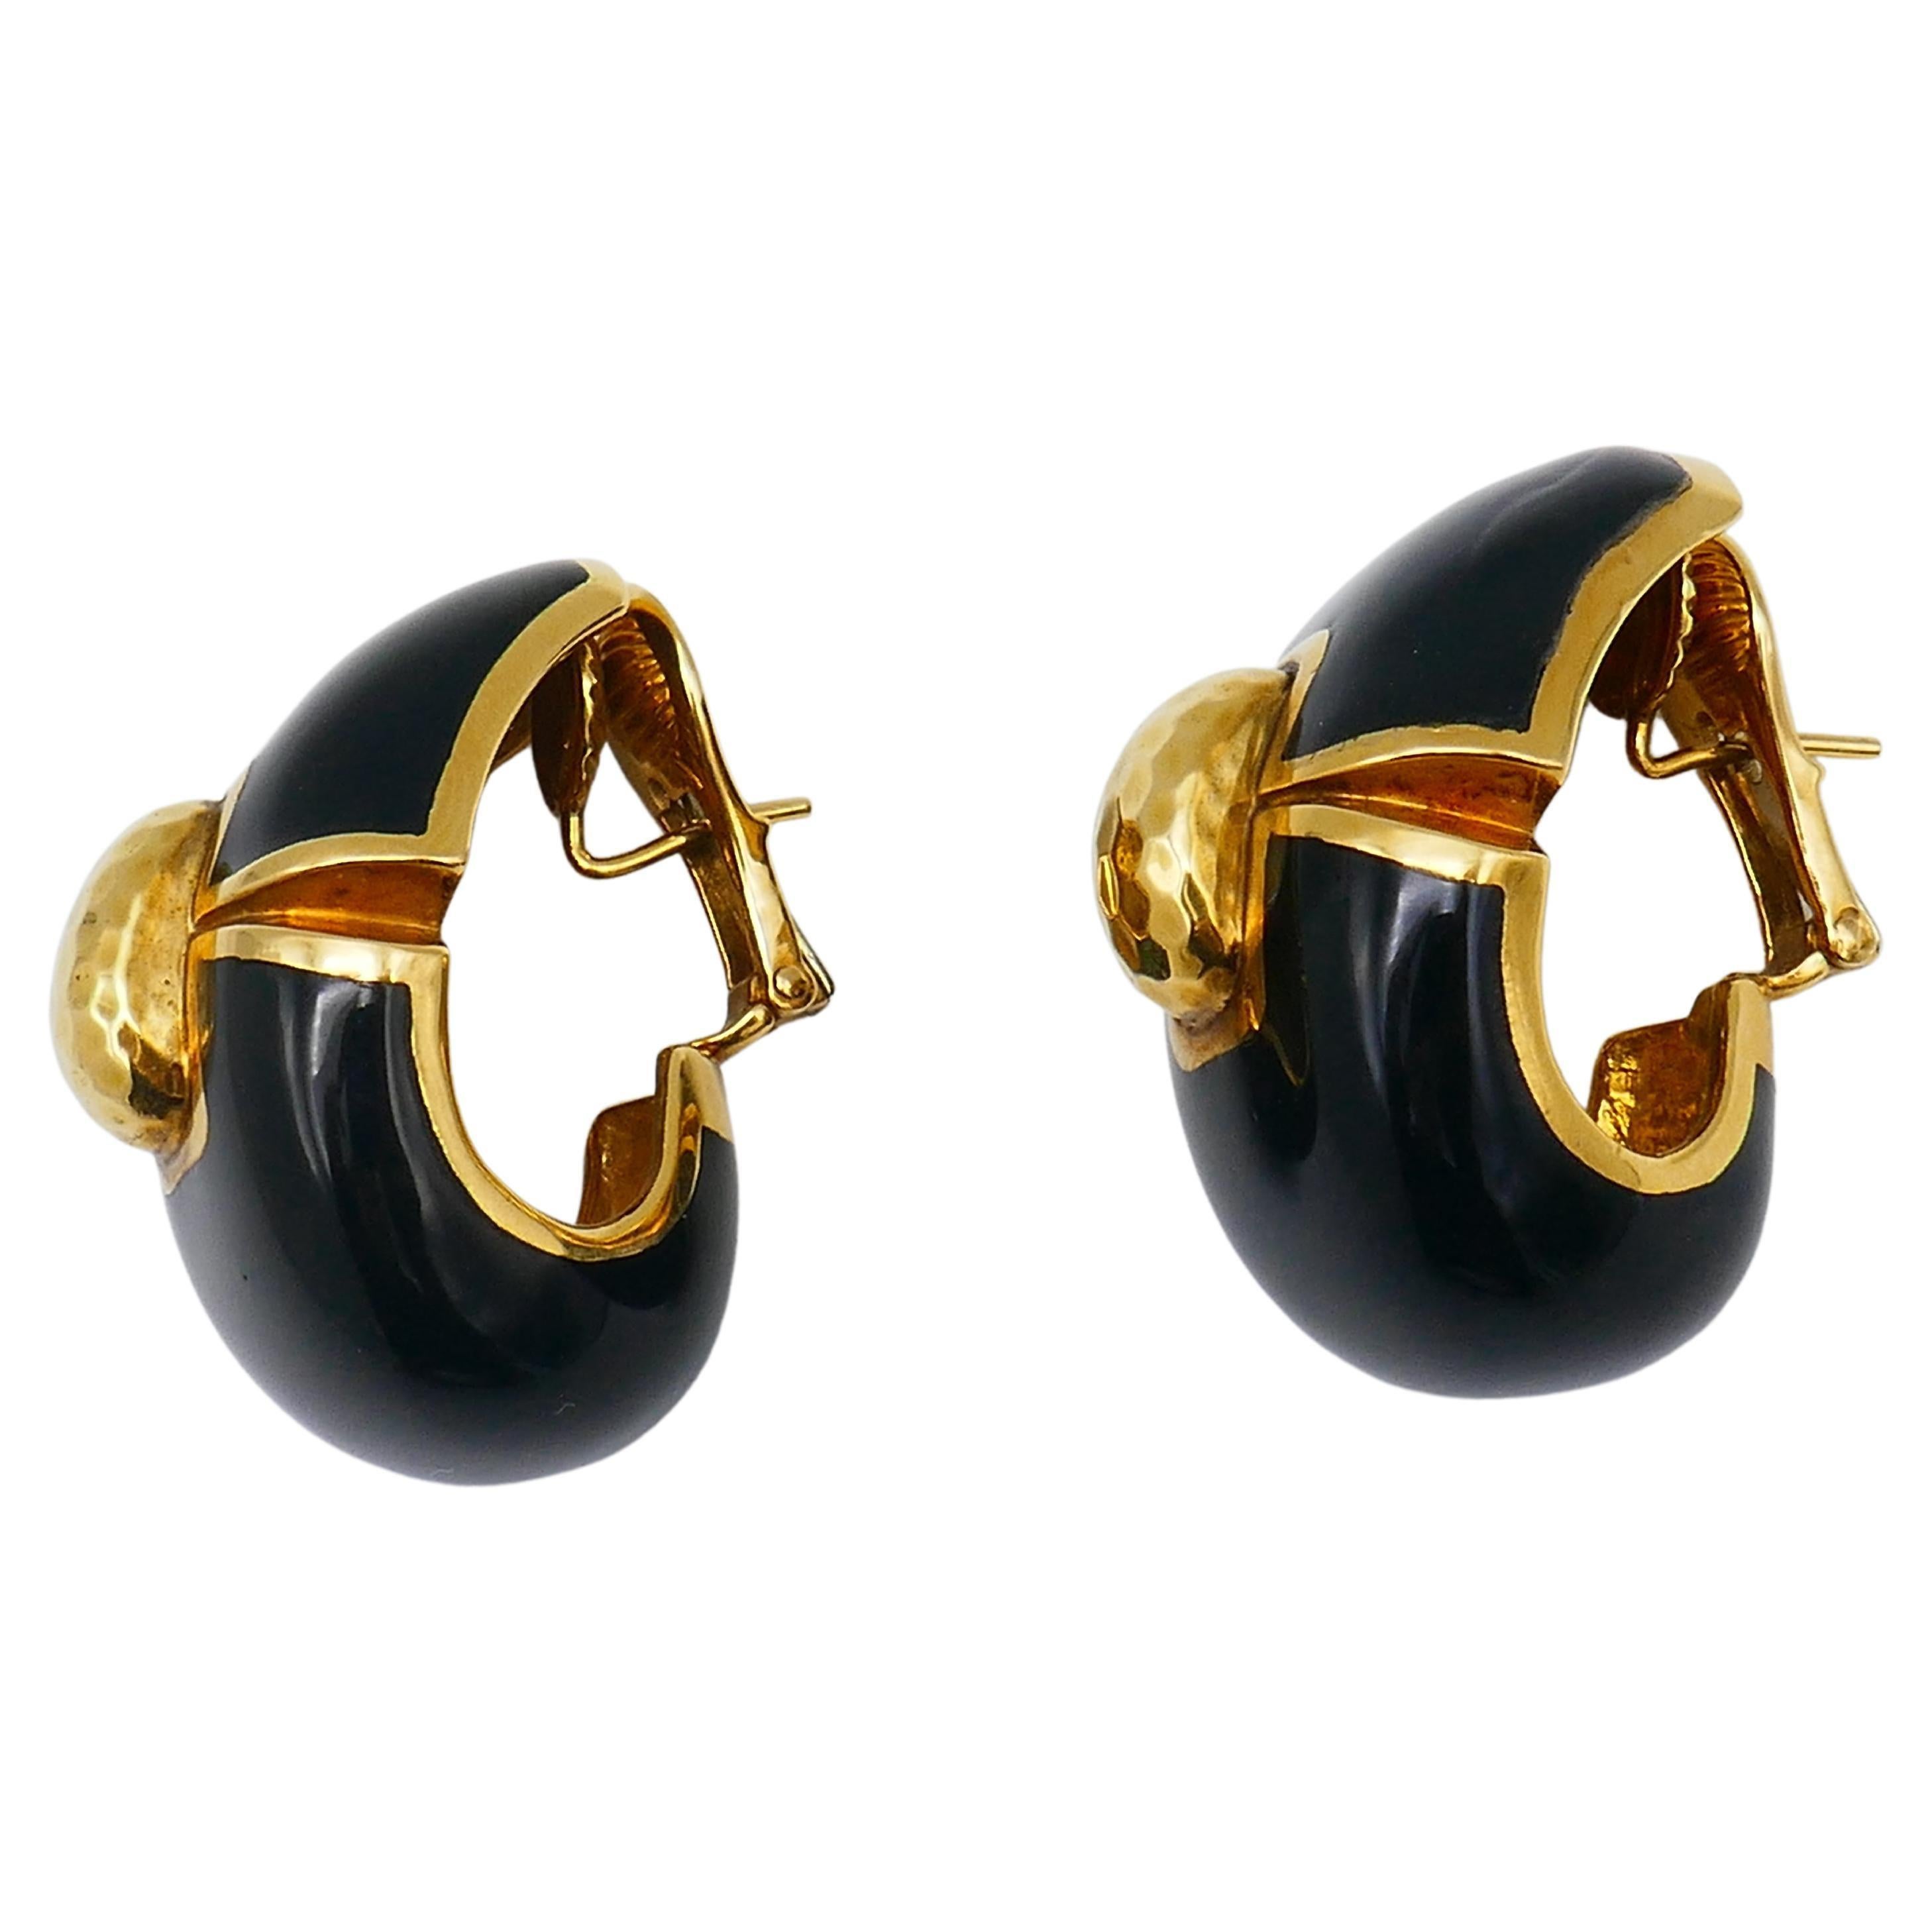 A rare pair of David Webb vintage gold earrings featuring black hot enamel.
A standing out piece carrying a strong personality with unmistakably David Webb's appeal.
The earrings have a unique shape with a 